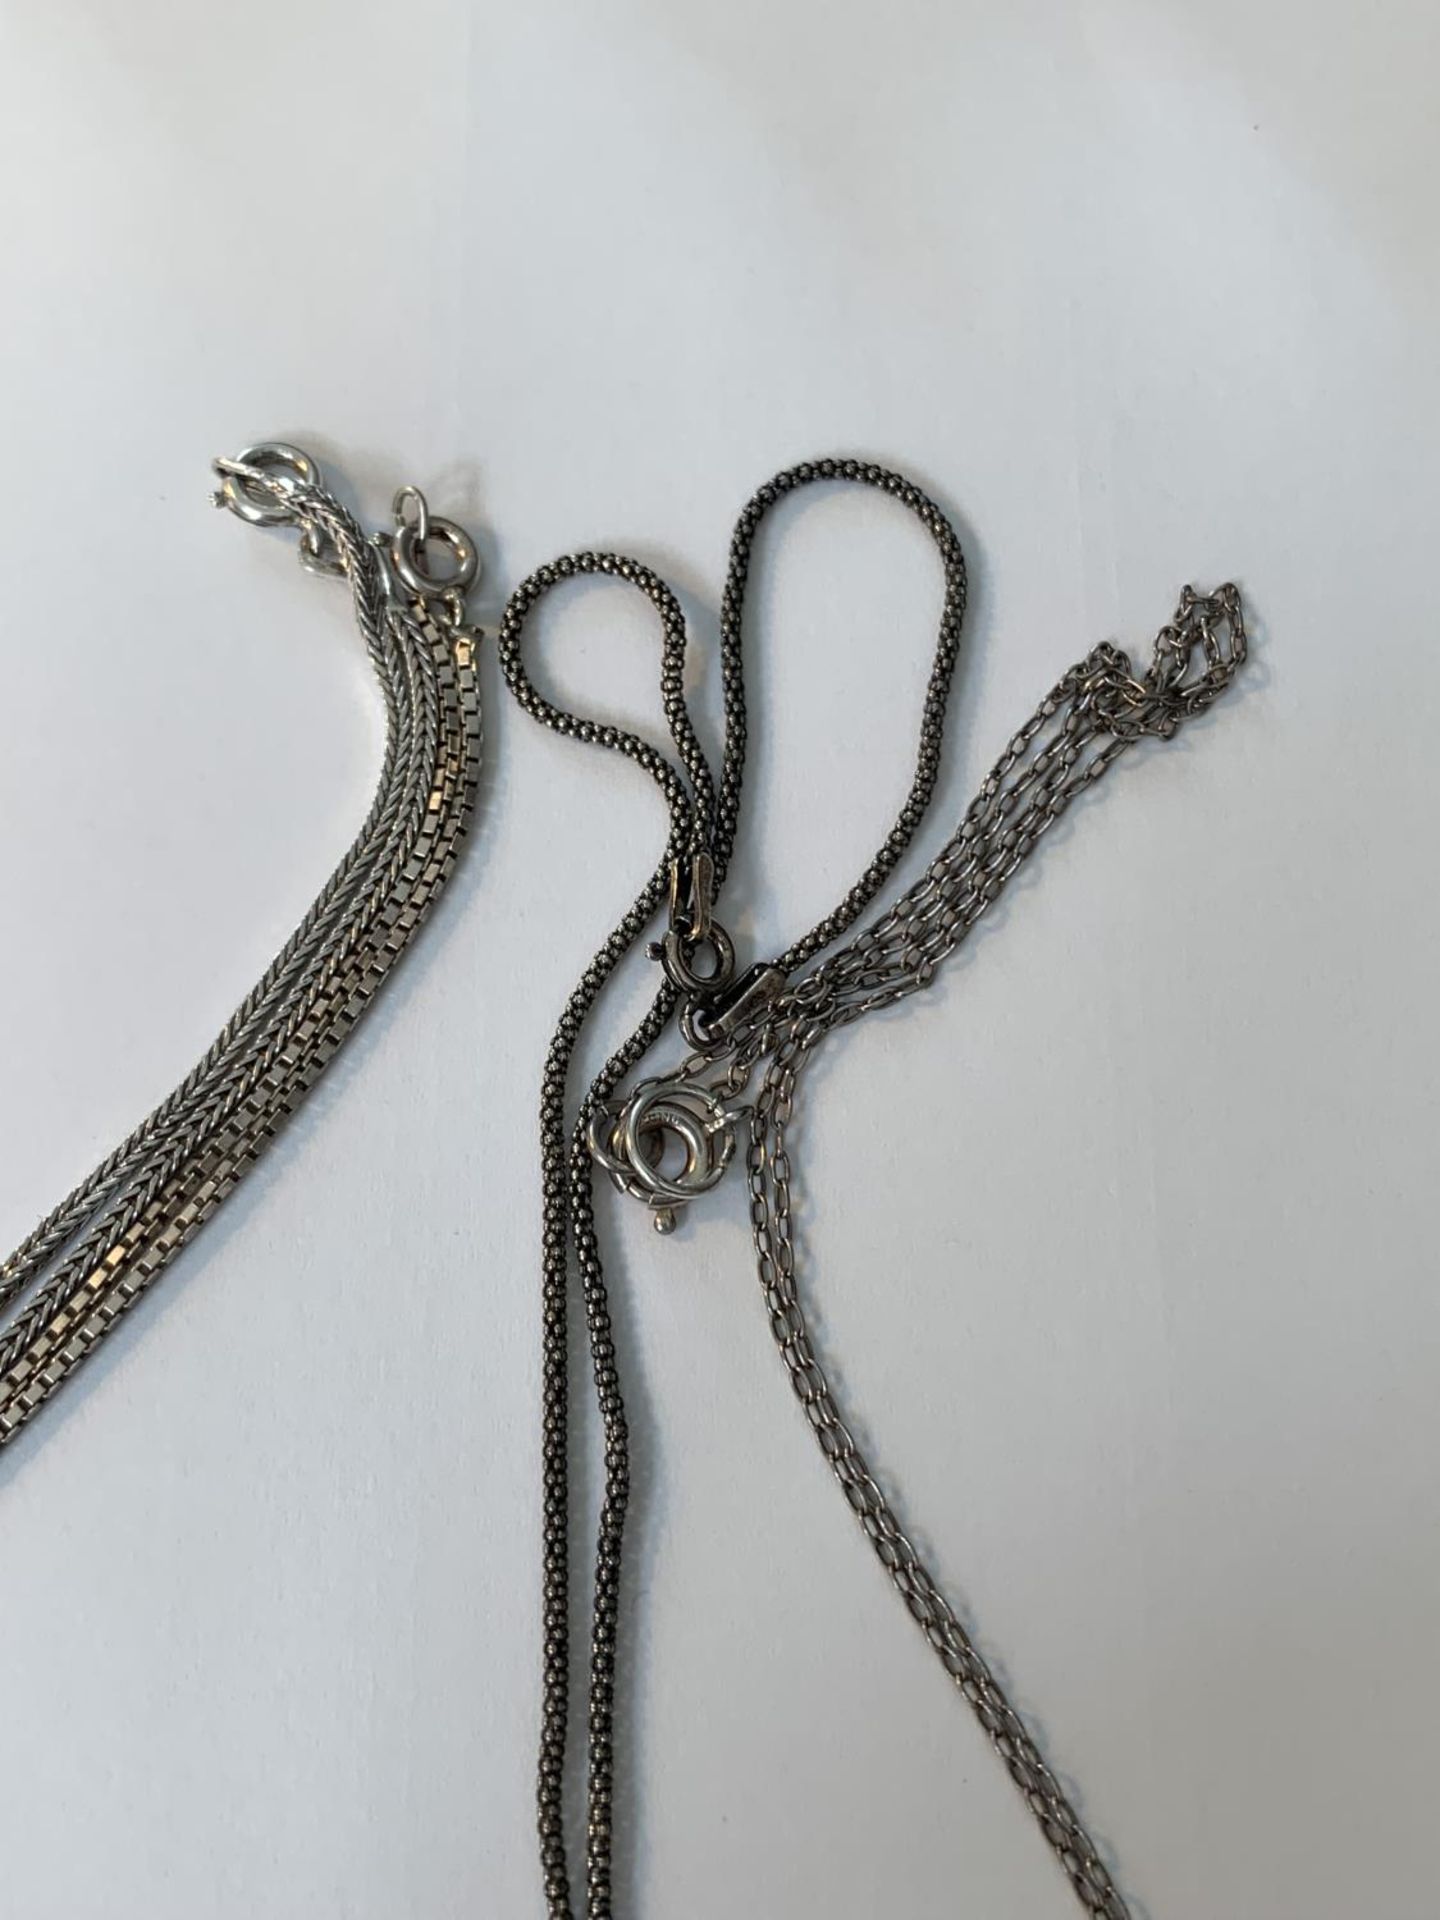 FOUR SILVER NECKLACES WITH PENDANTS - Image 4 of 4